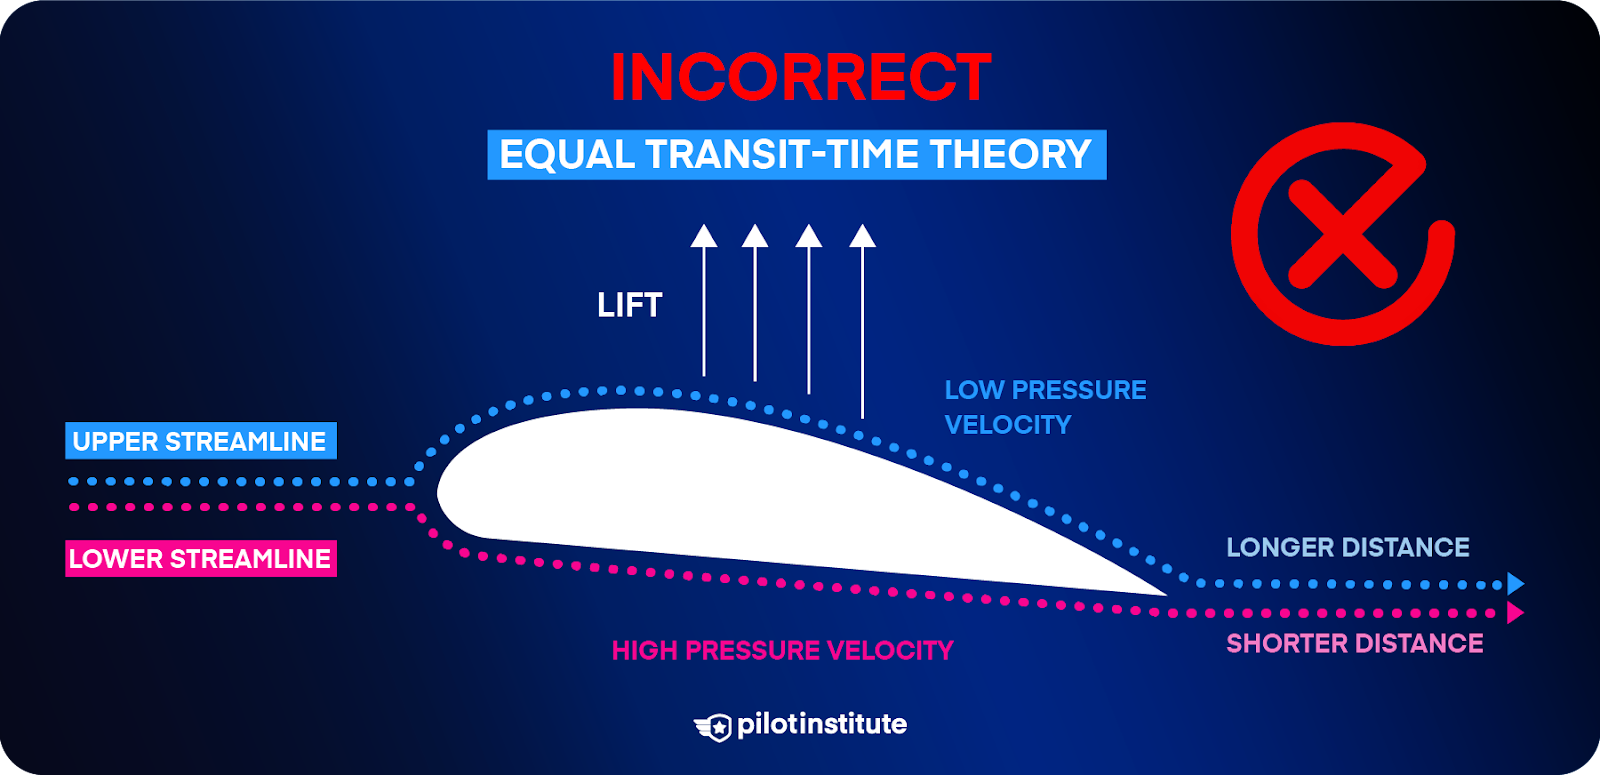 A diagram illustrating the incorrect equal transit-time theory.